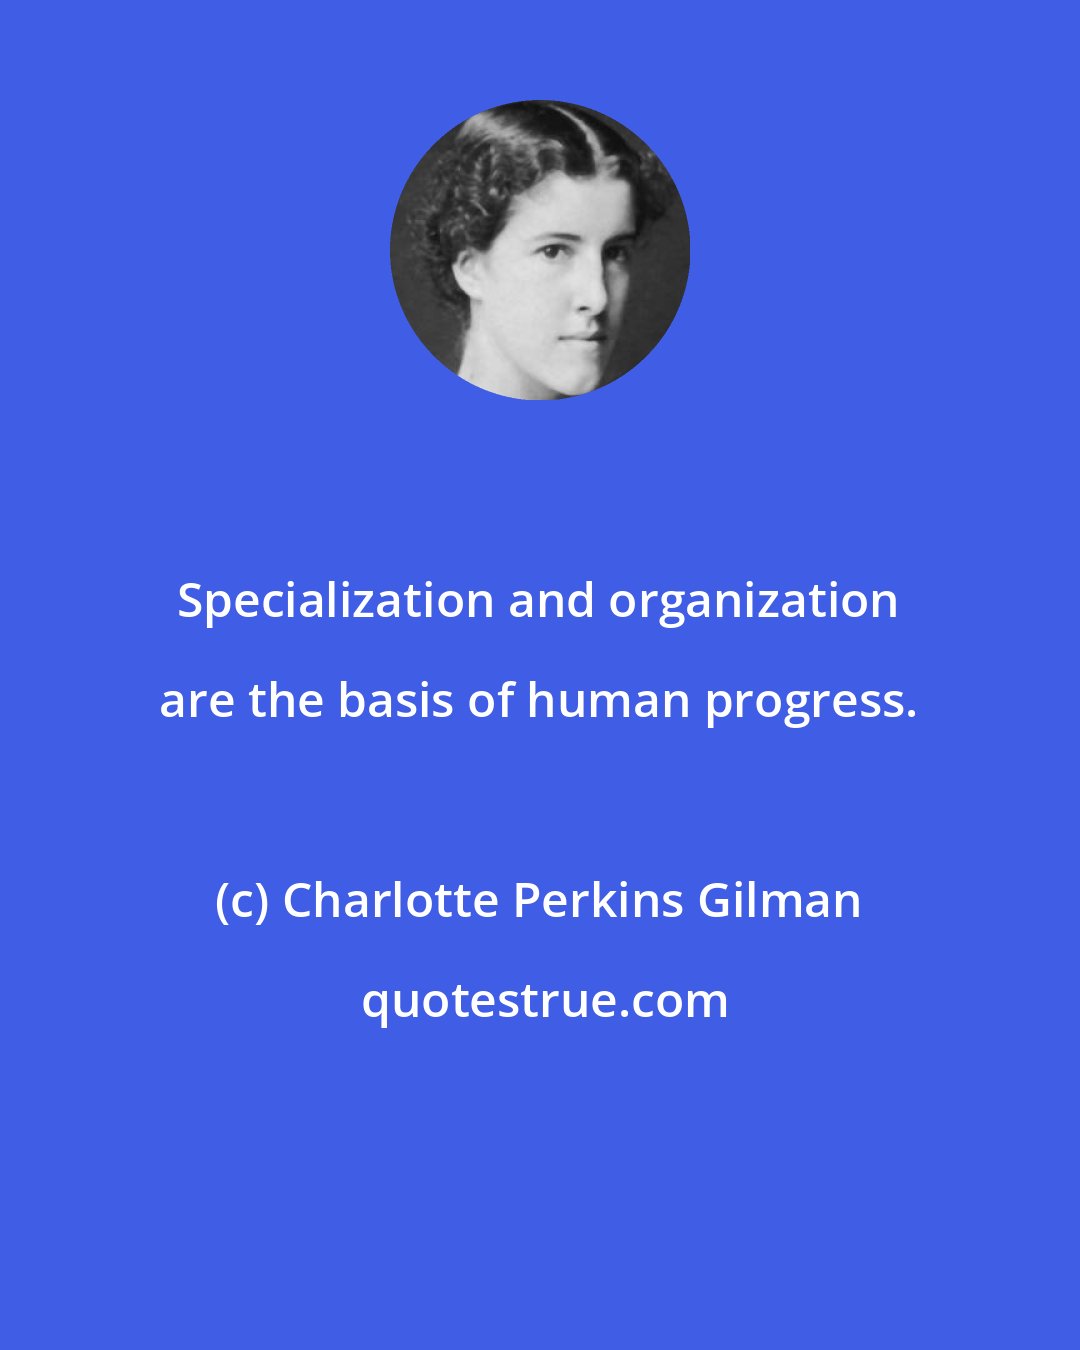 Charlotte Perkins Gilman: Specialization and organization are the basis of human progress.